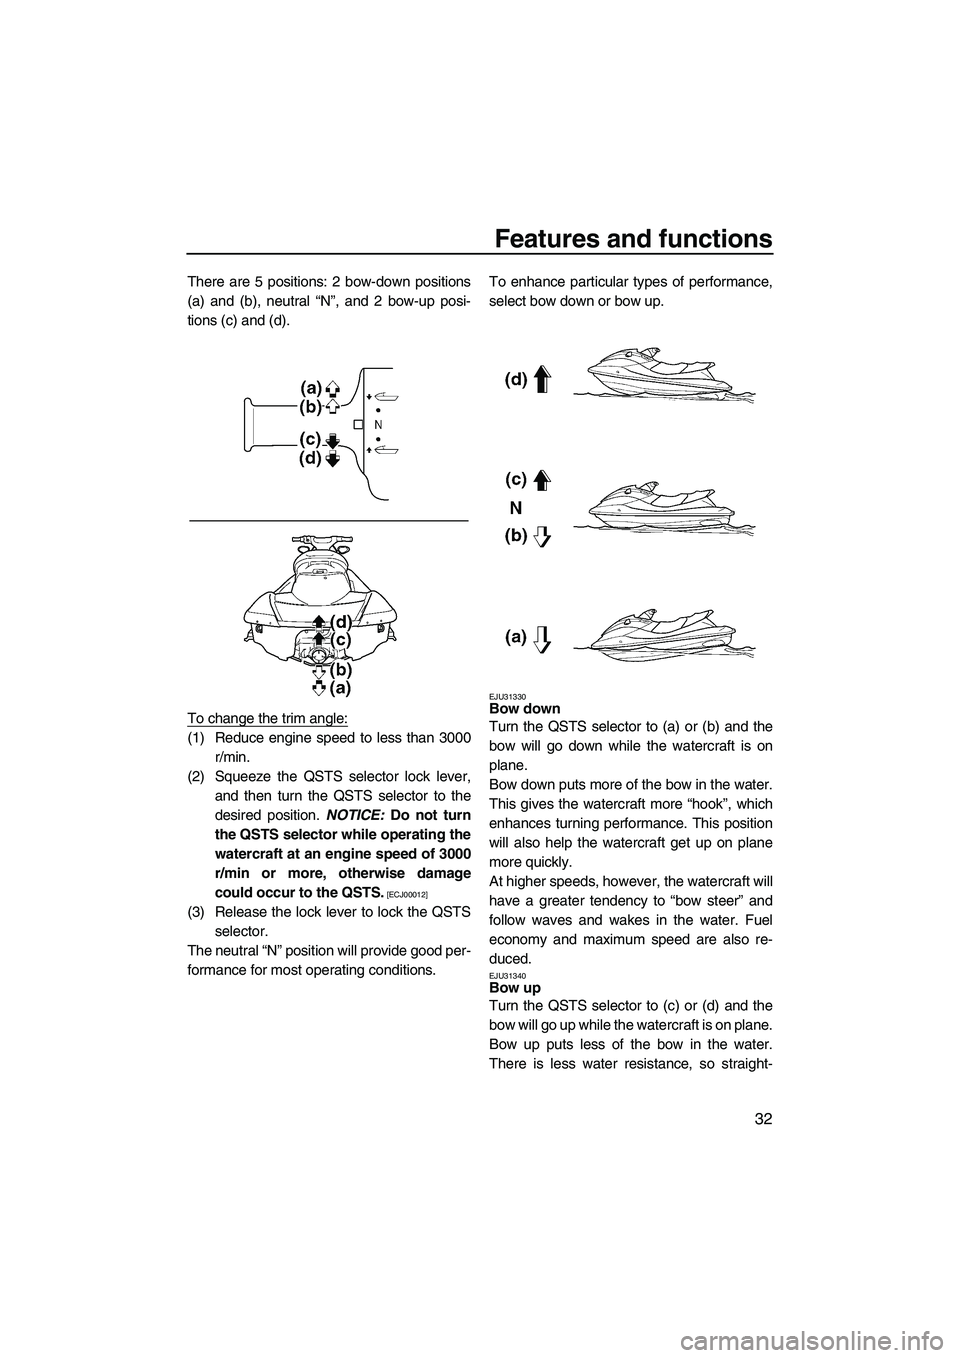 YAMAHA SVHO 2009 Owners Guide Features and functions
32
There are 5 positions: 2 bow-down positions
(a) and (b), neutral “N”, and 2 bow-up posi-
tions (c) and (d).
To change the trim angle:
(1) Reduce engine speed to less than